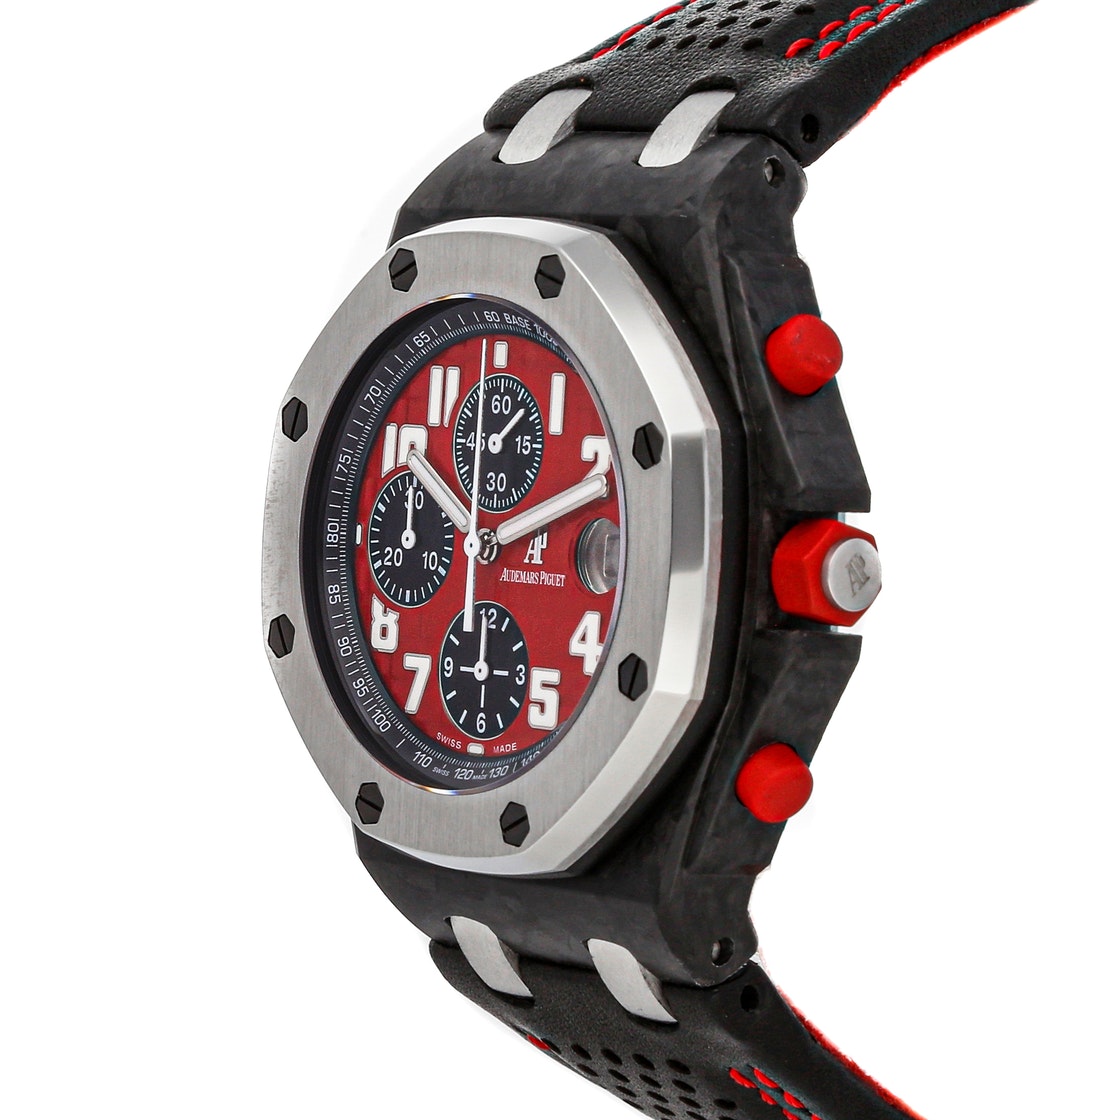 

Audemars Piguet Red Forged Carbon And Stainless Steel Royal Oak Offshore Chronograph Singapore Grand Prix